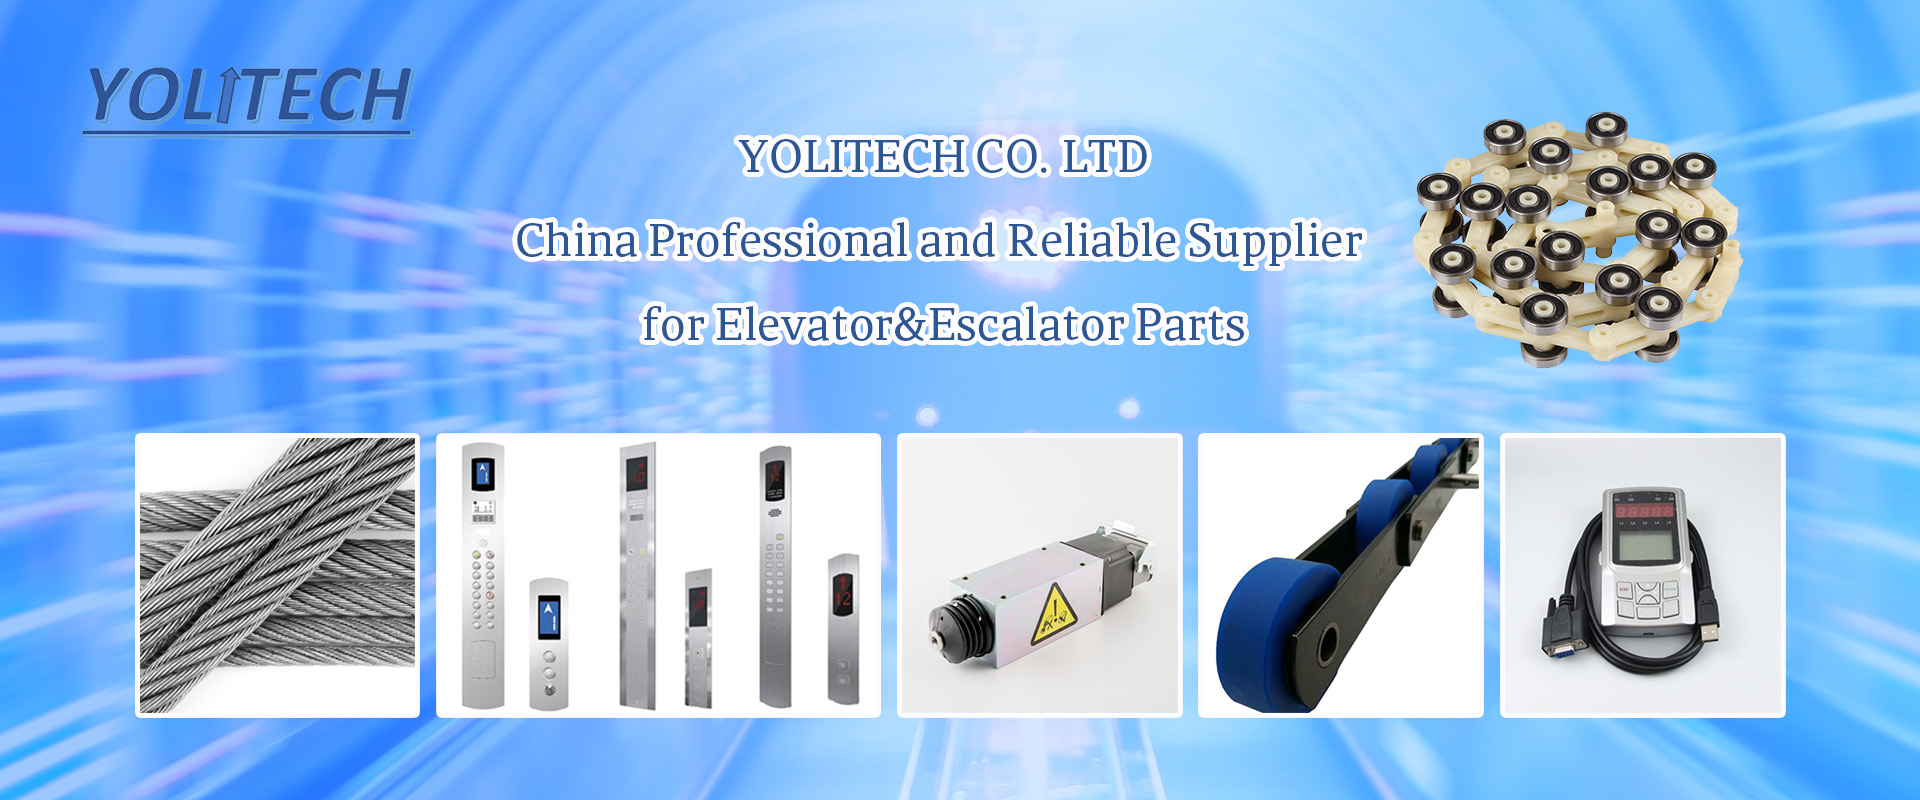 YOLITECH CO. LTD---China Professional and Reliable Supplier for Elevator&Escalator Parts